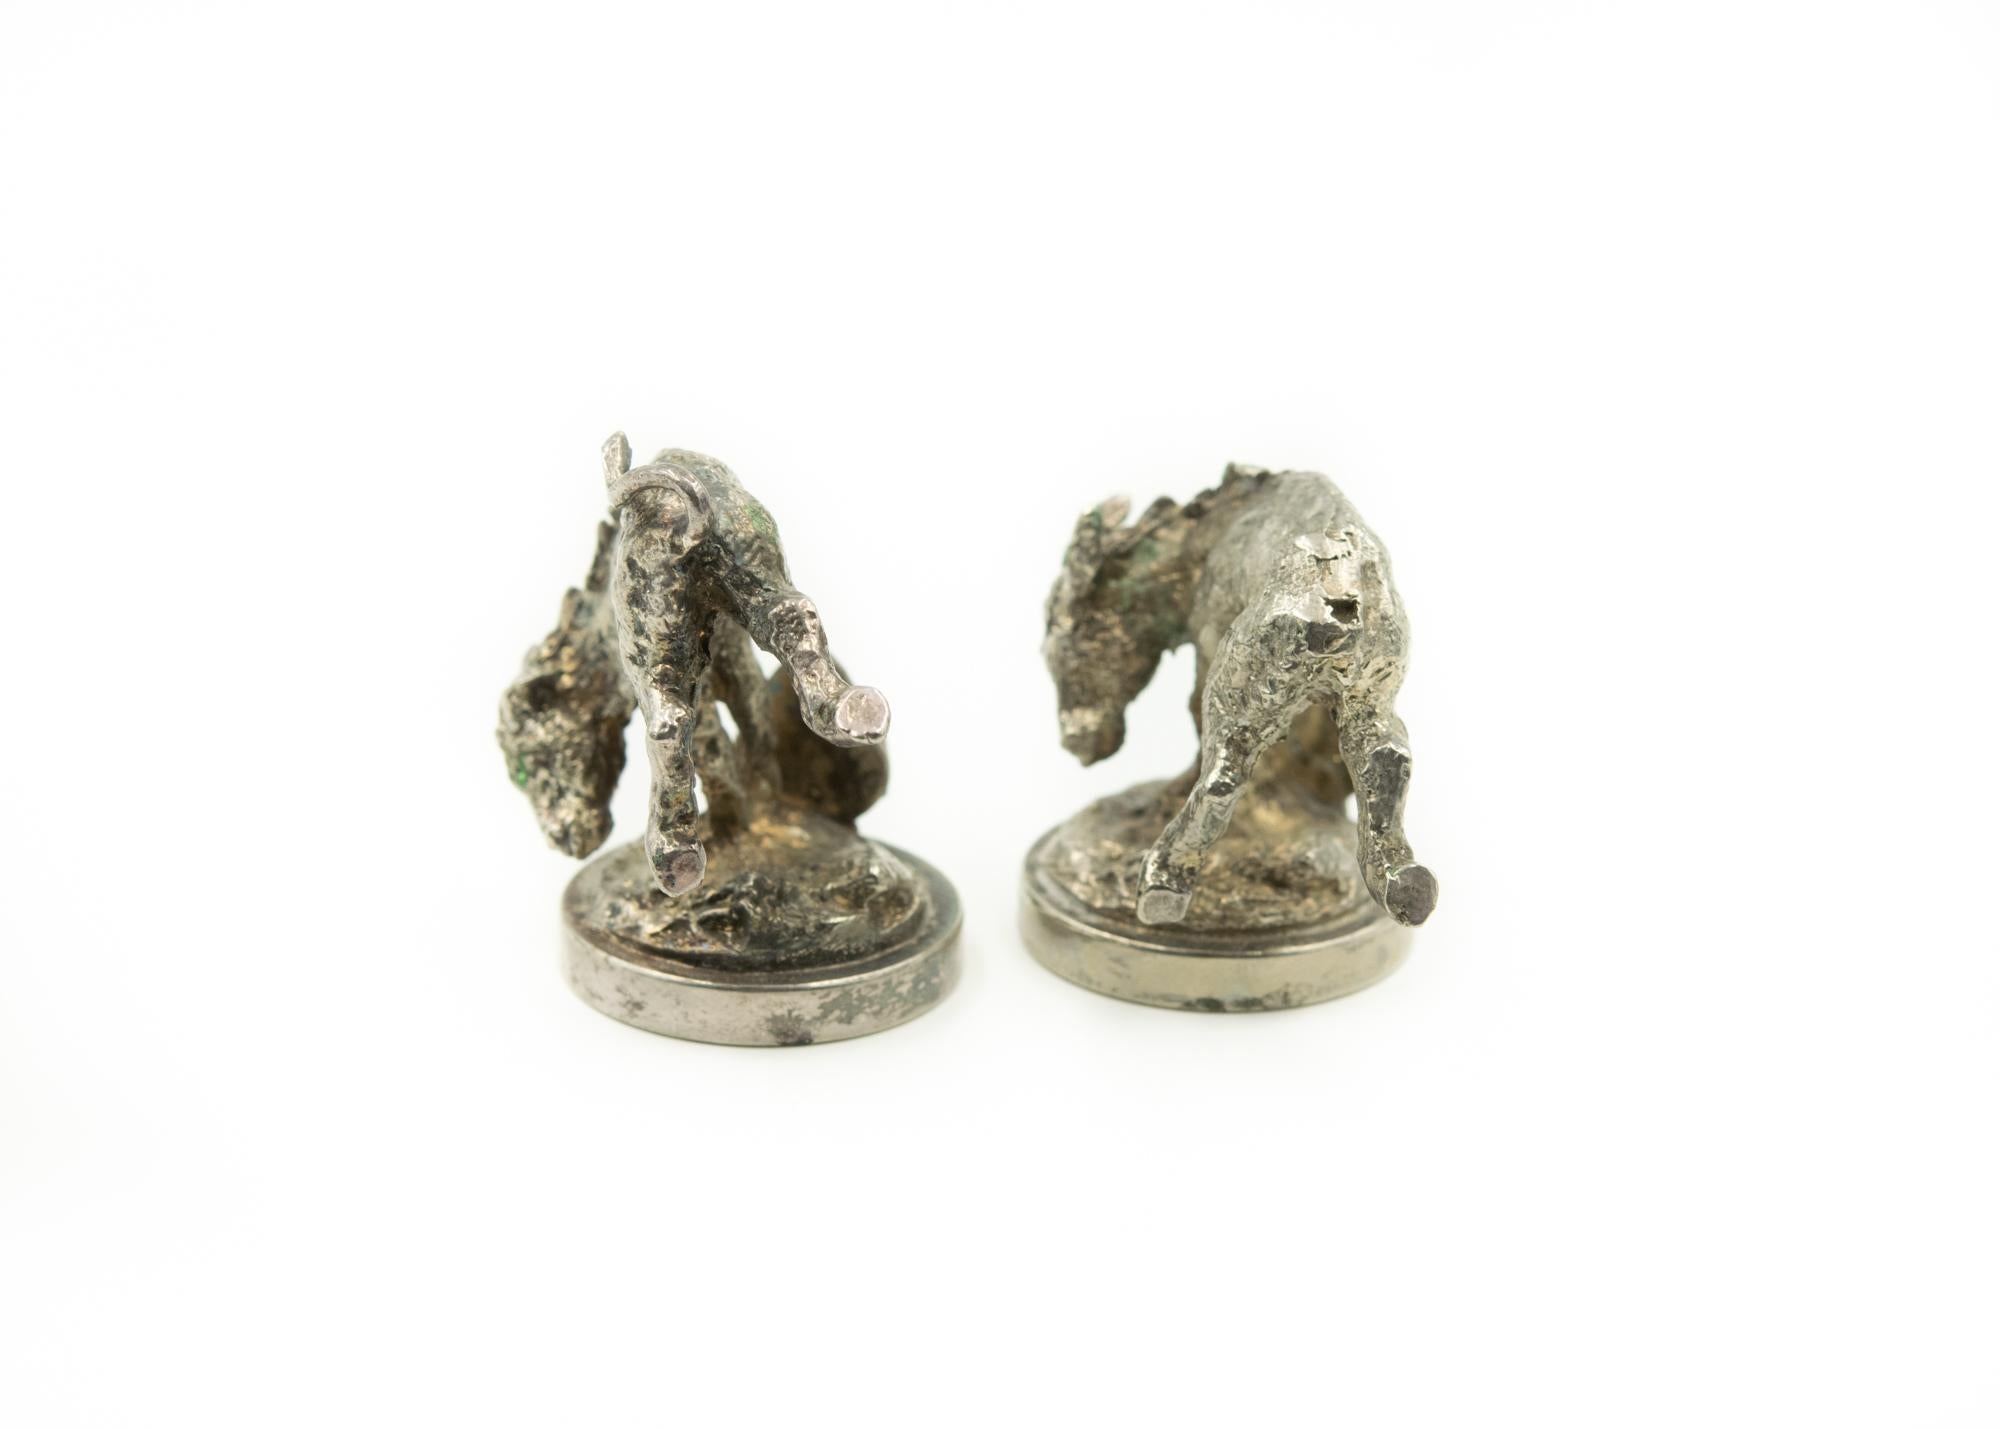 Highly stylized pair of vintage silver plate donkey menus, place cards, or card holders. Great detail to their facial expressions and bodies. There is a clip attached to the base to hold a menu or place card.
One donkey is missing his tail.
 